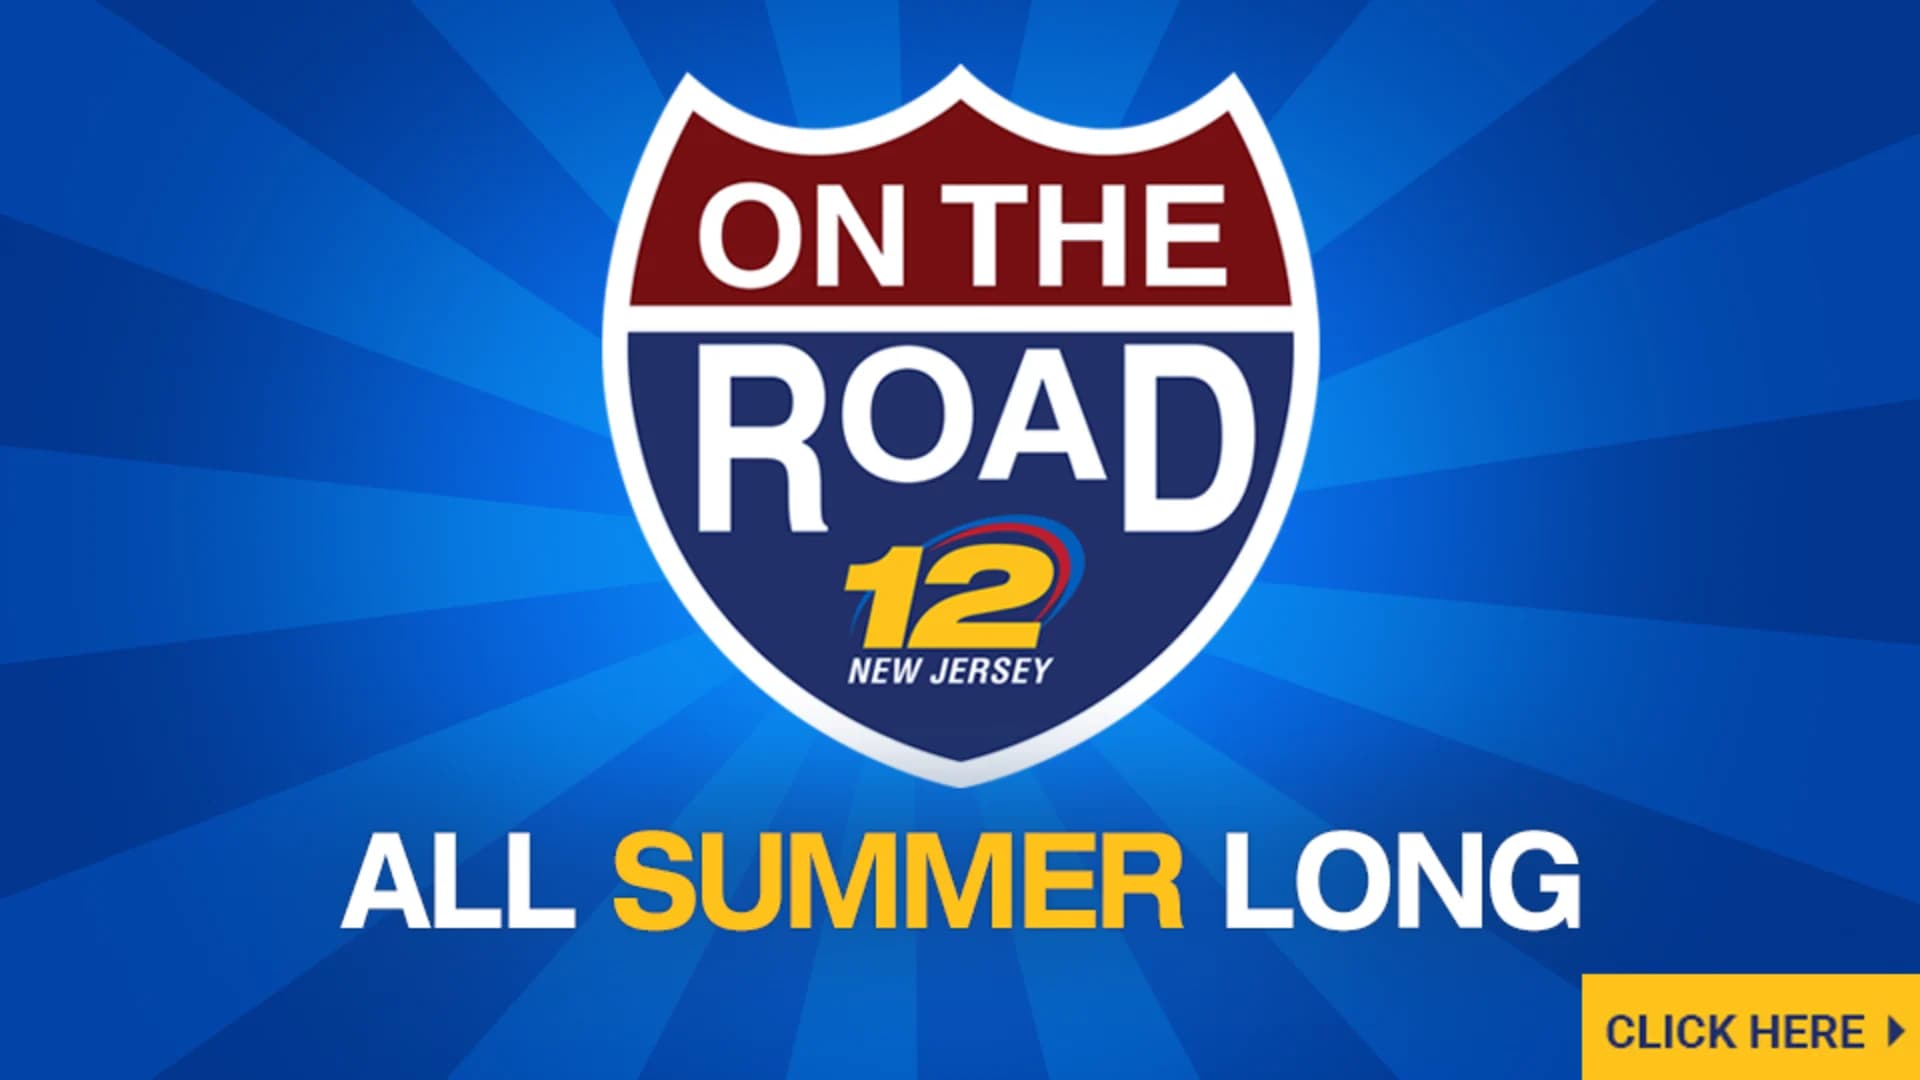 News 12 New Jersey On The Road 2019 locations